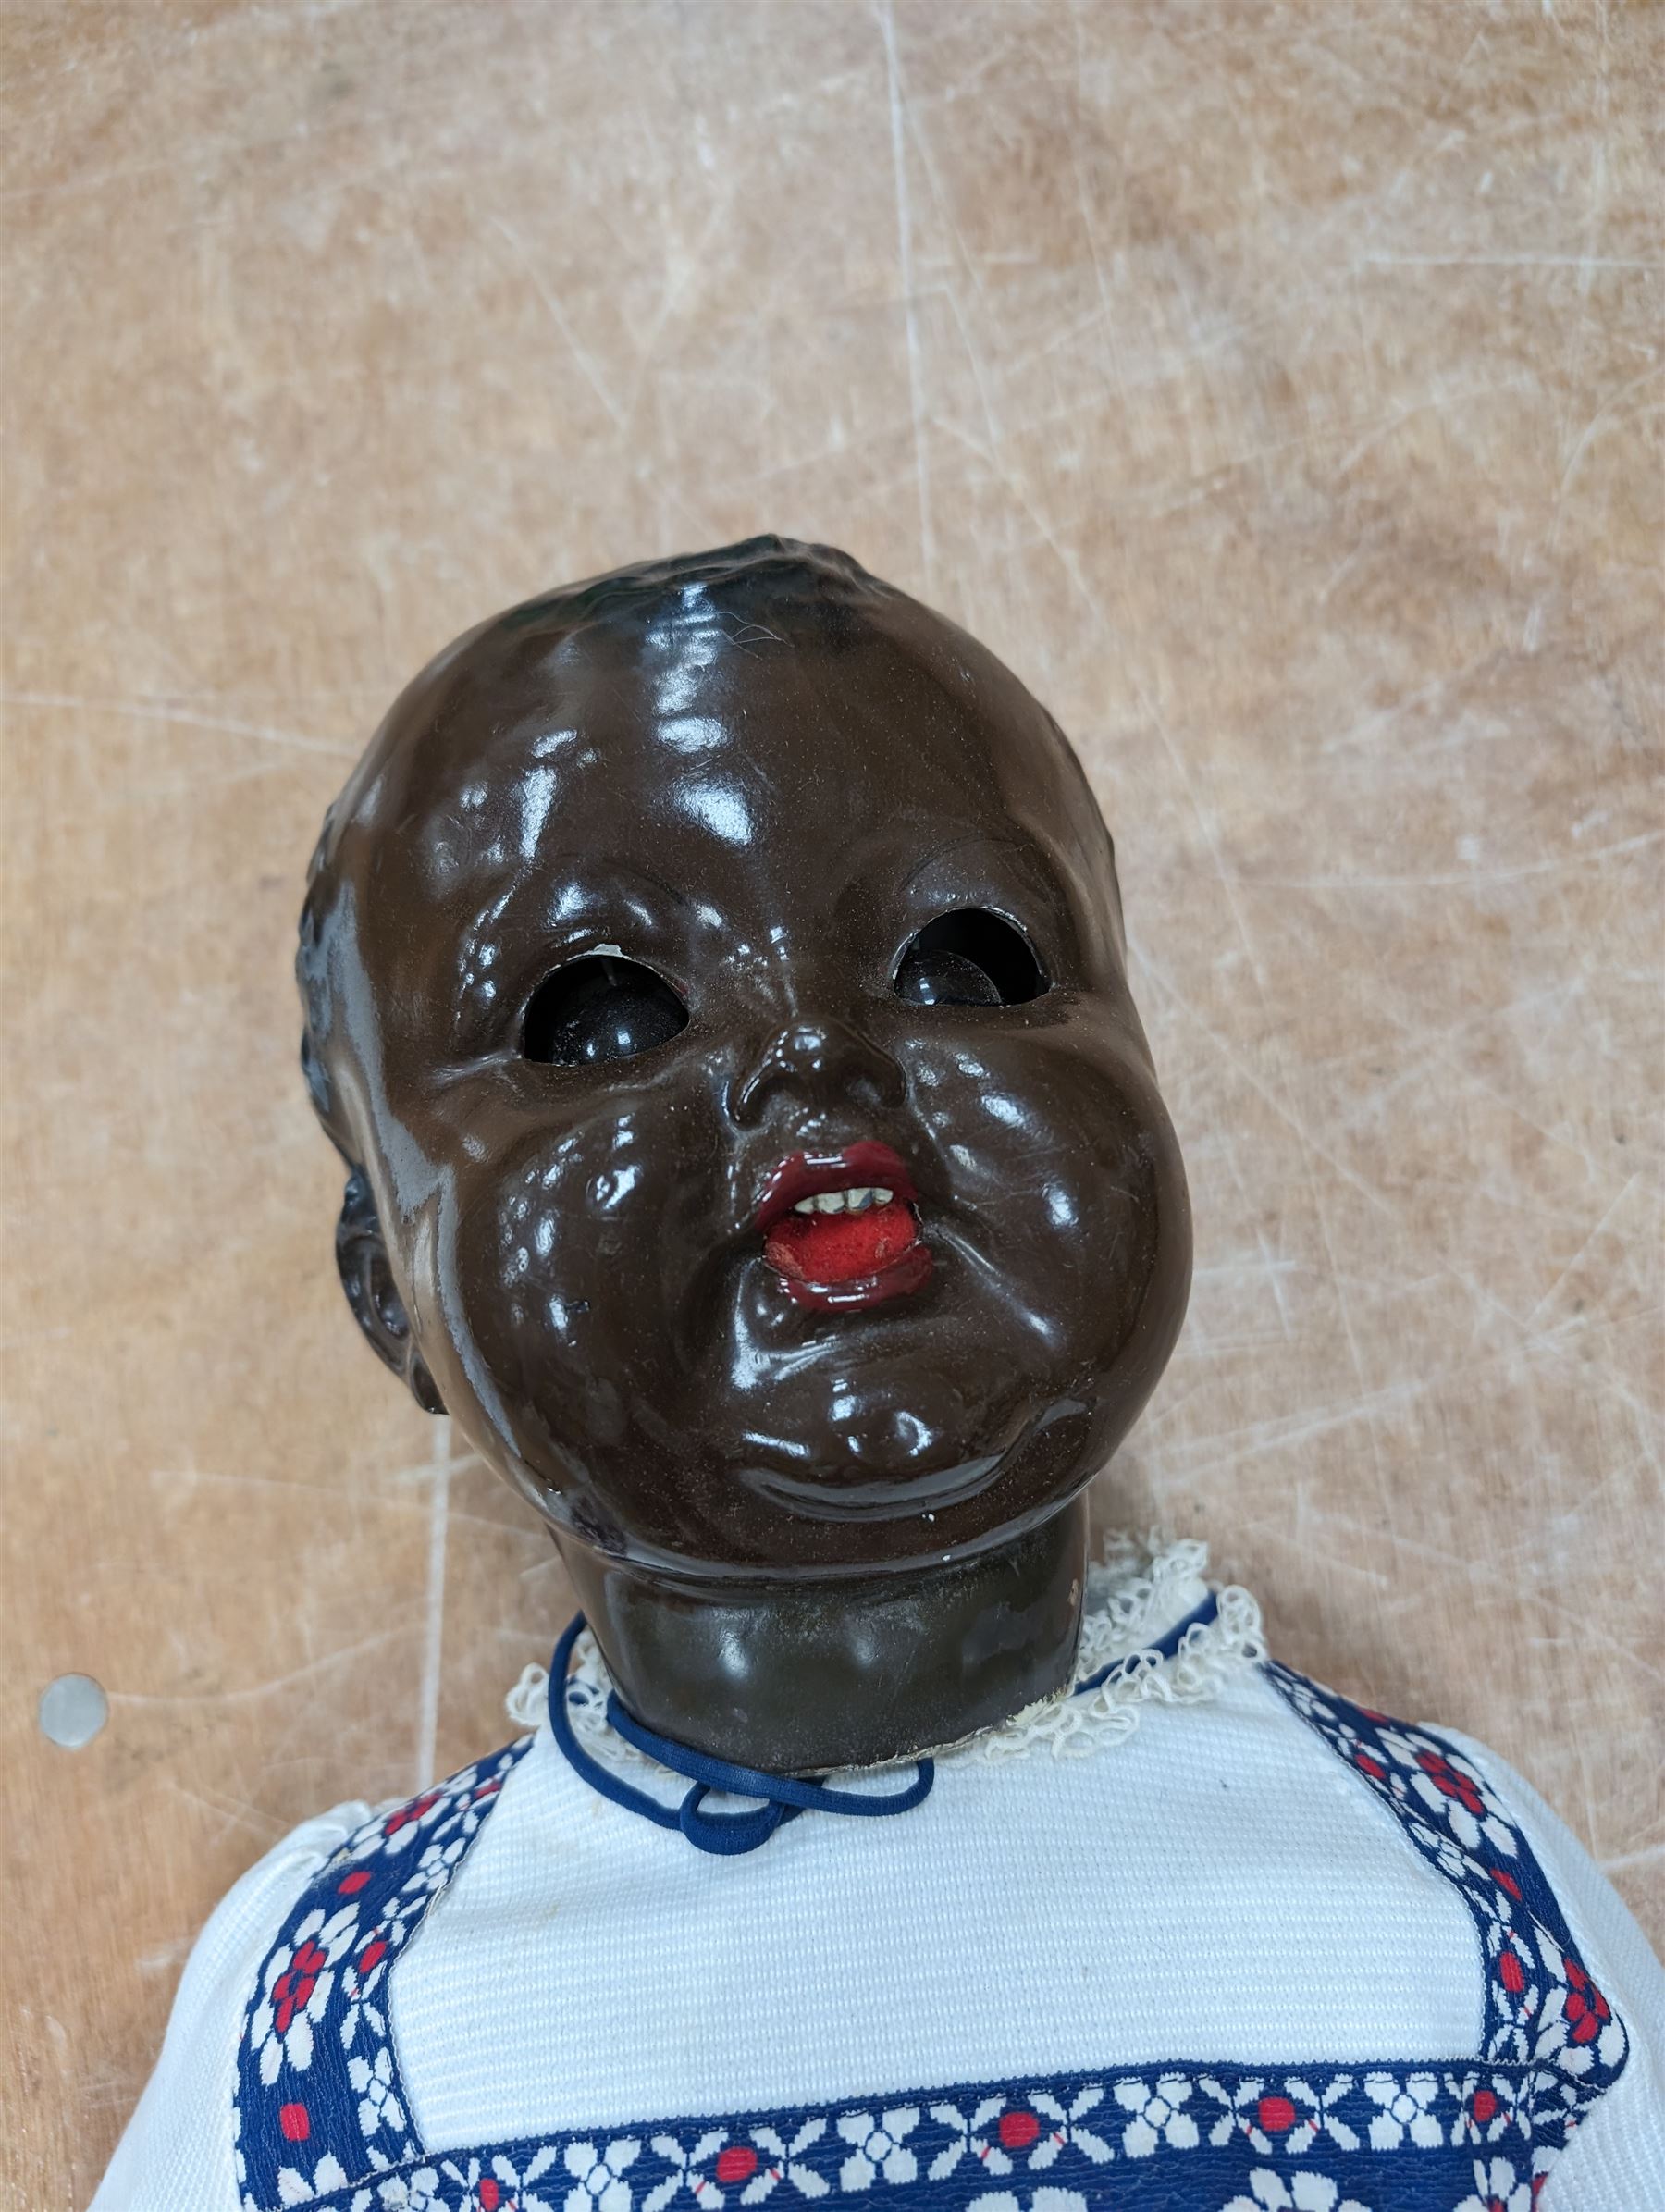 Mid 20th century black baby doll - Image 2 of 3